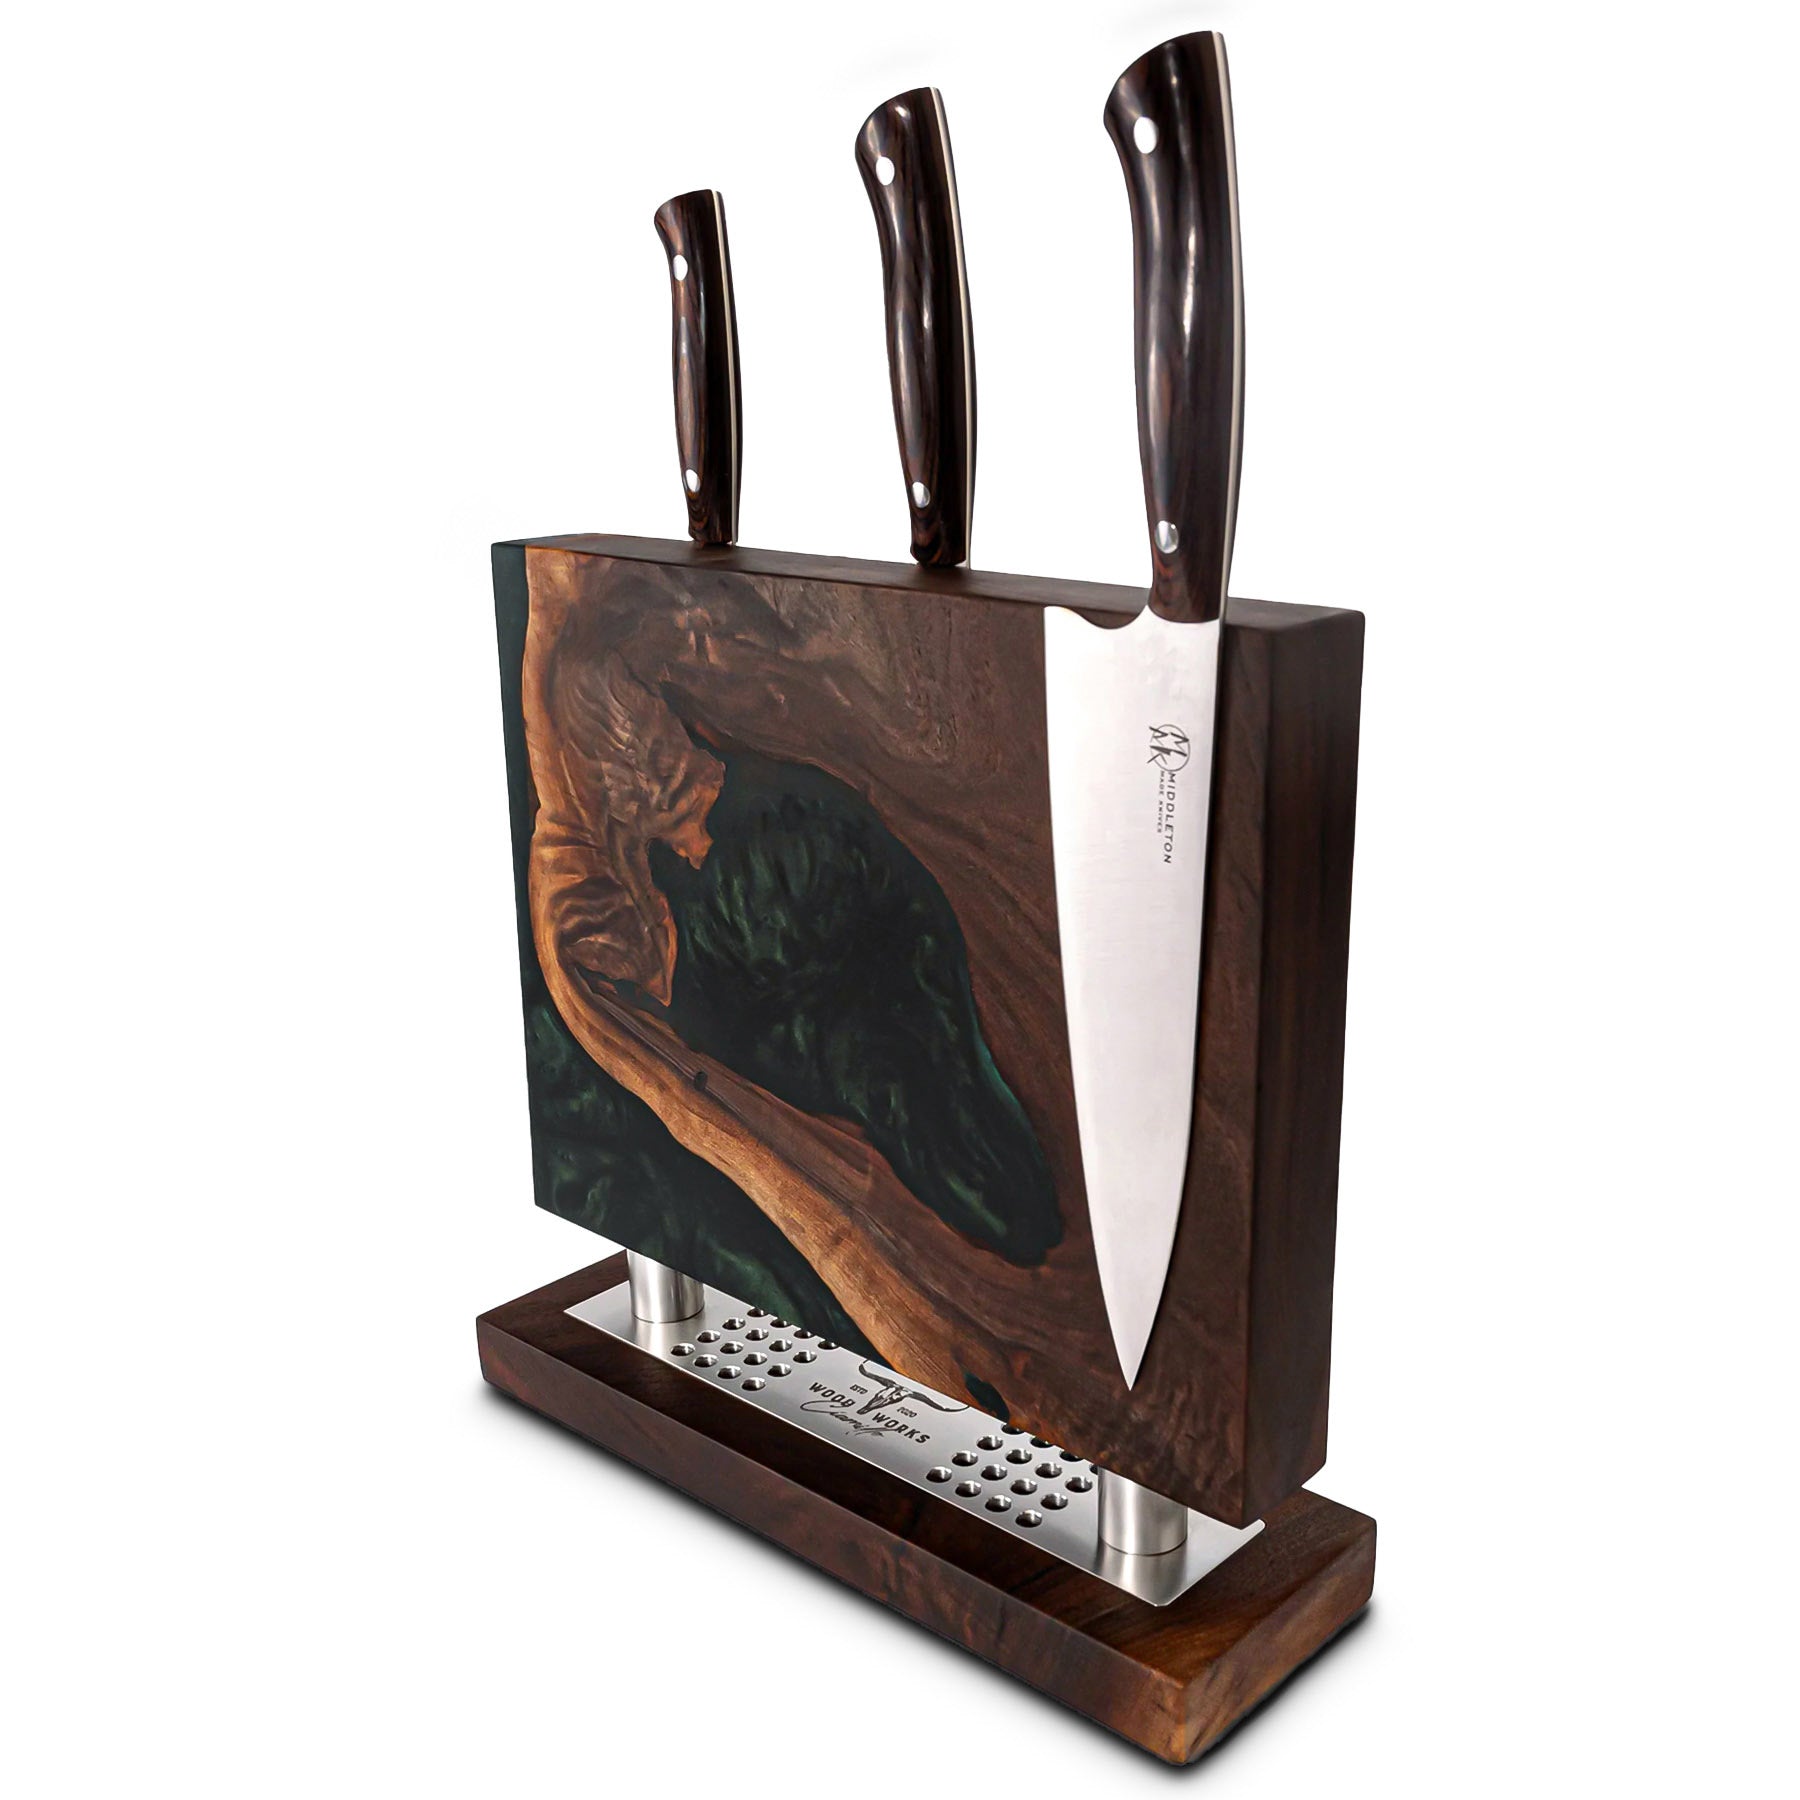 WA22 Walnut and Emerald Green Epoxy Resin Double-Sided Magnetic Knife Block (You Will Receive Block Shown)